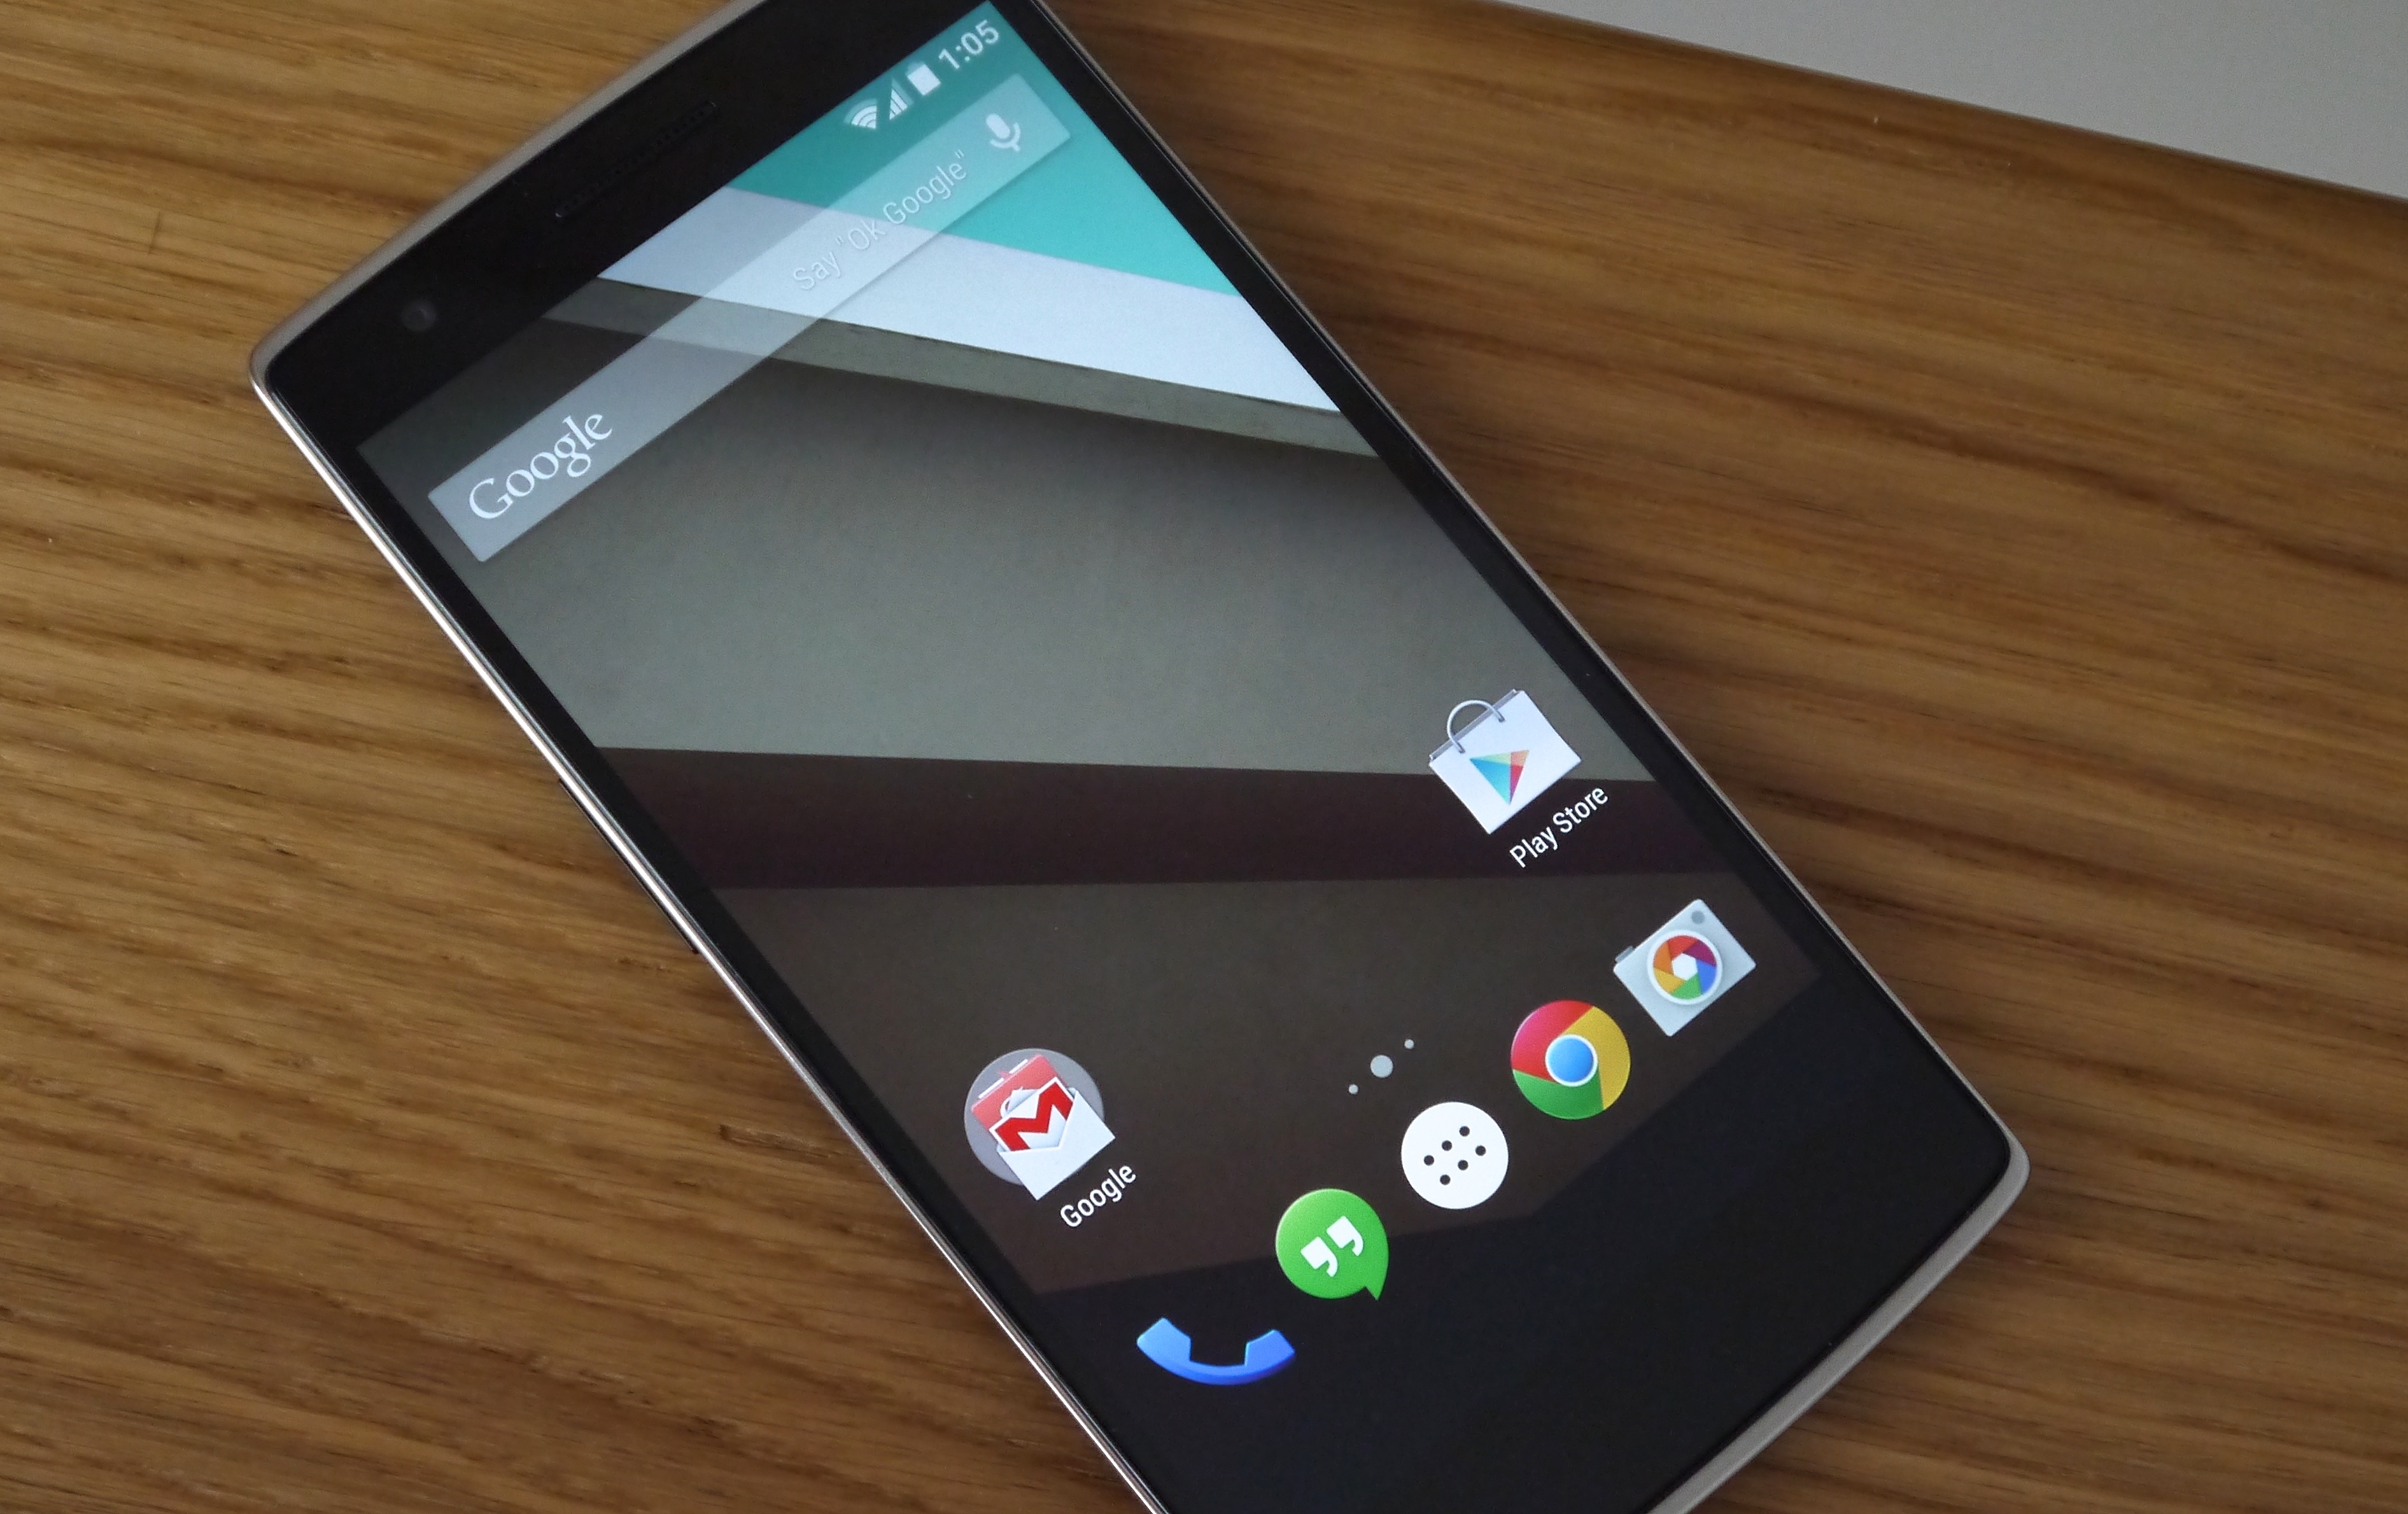 Nexus 5 Android 5.0.1 update rolling out, as per Sprint and T-Mobile ...